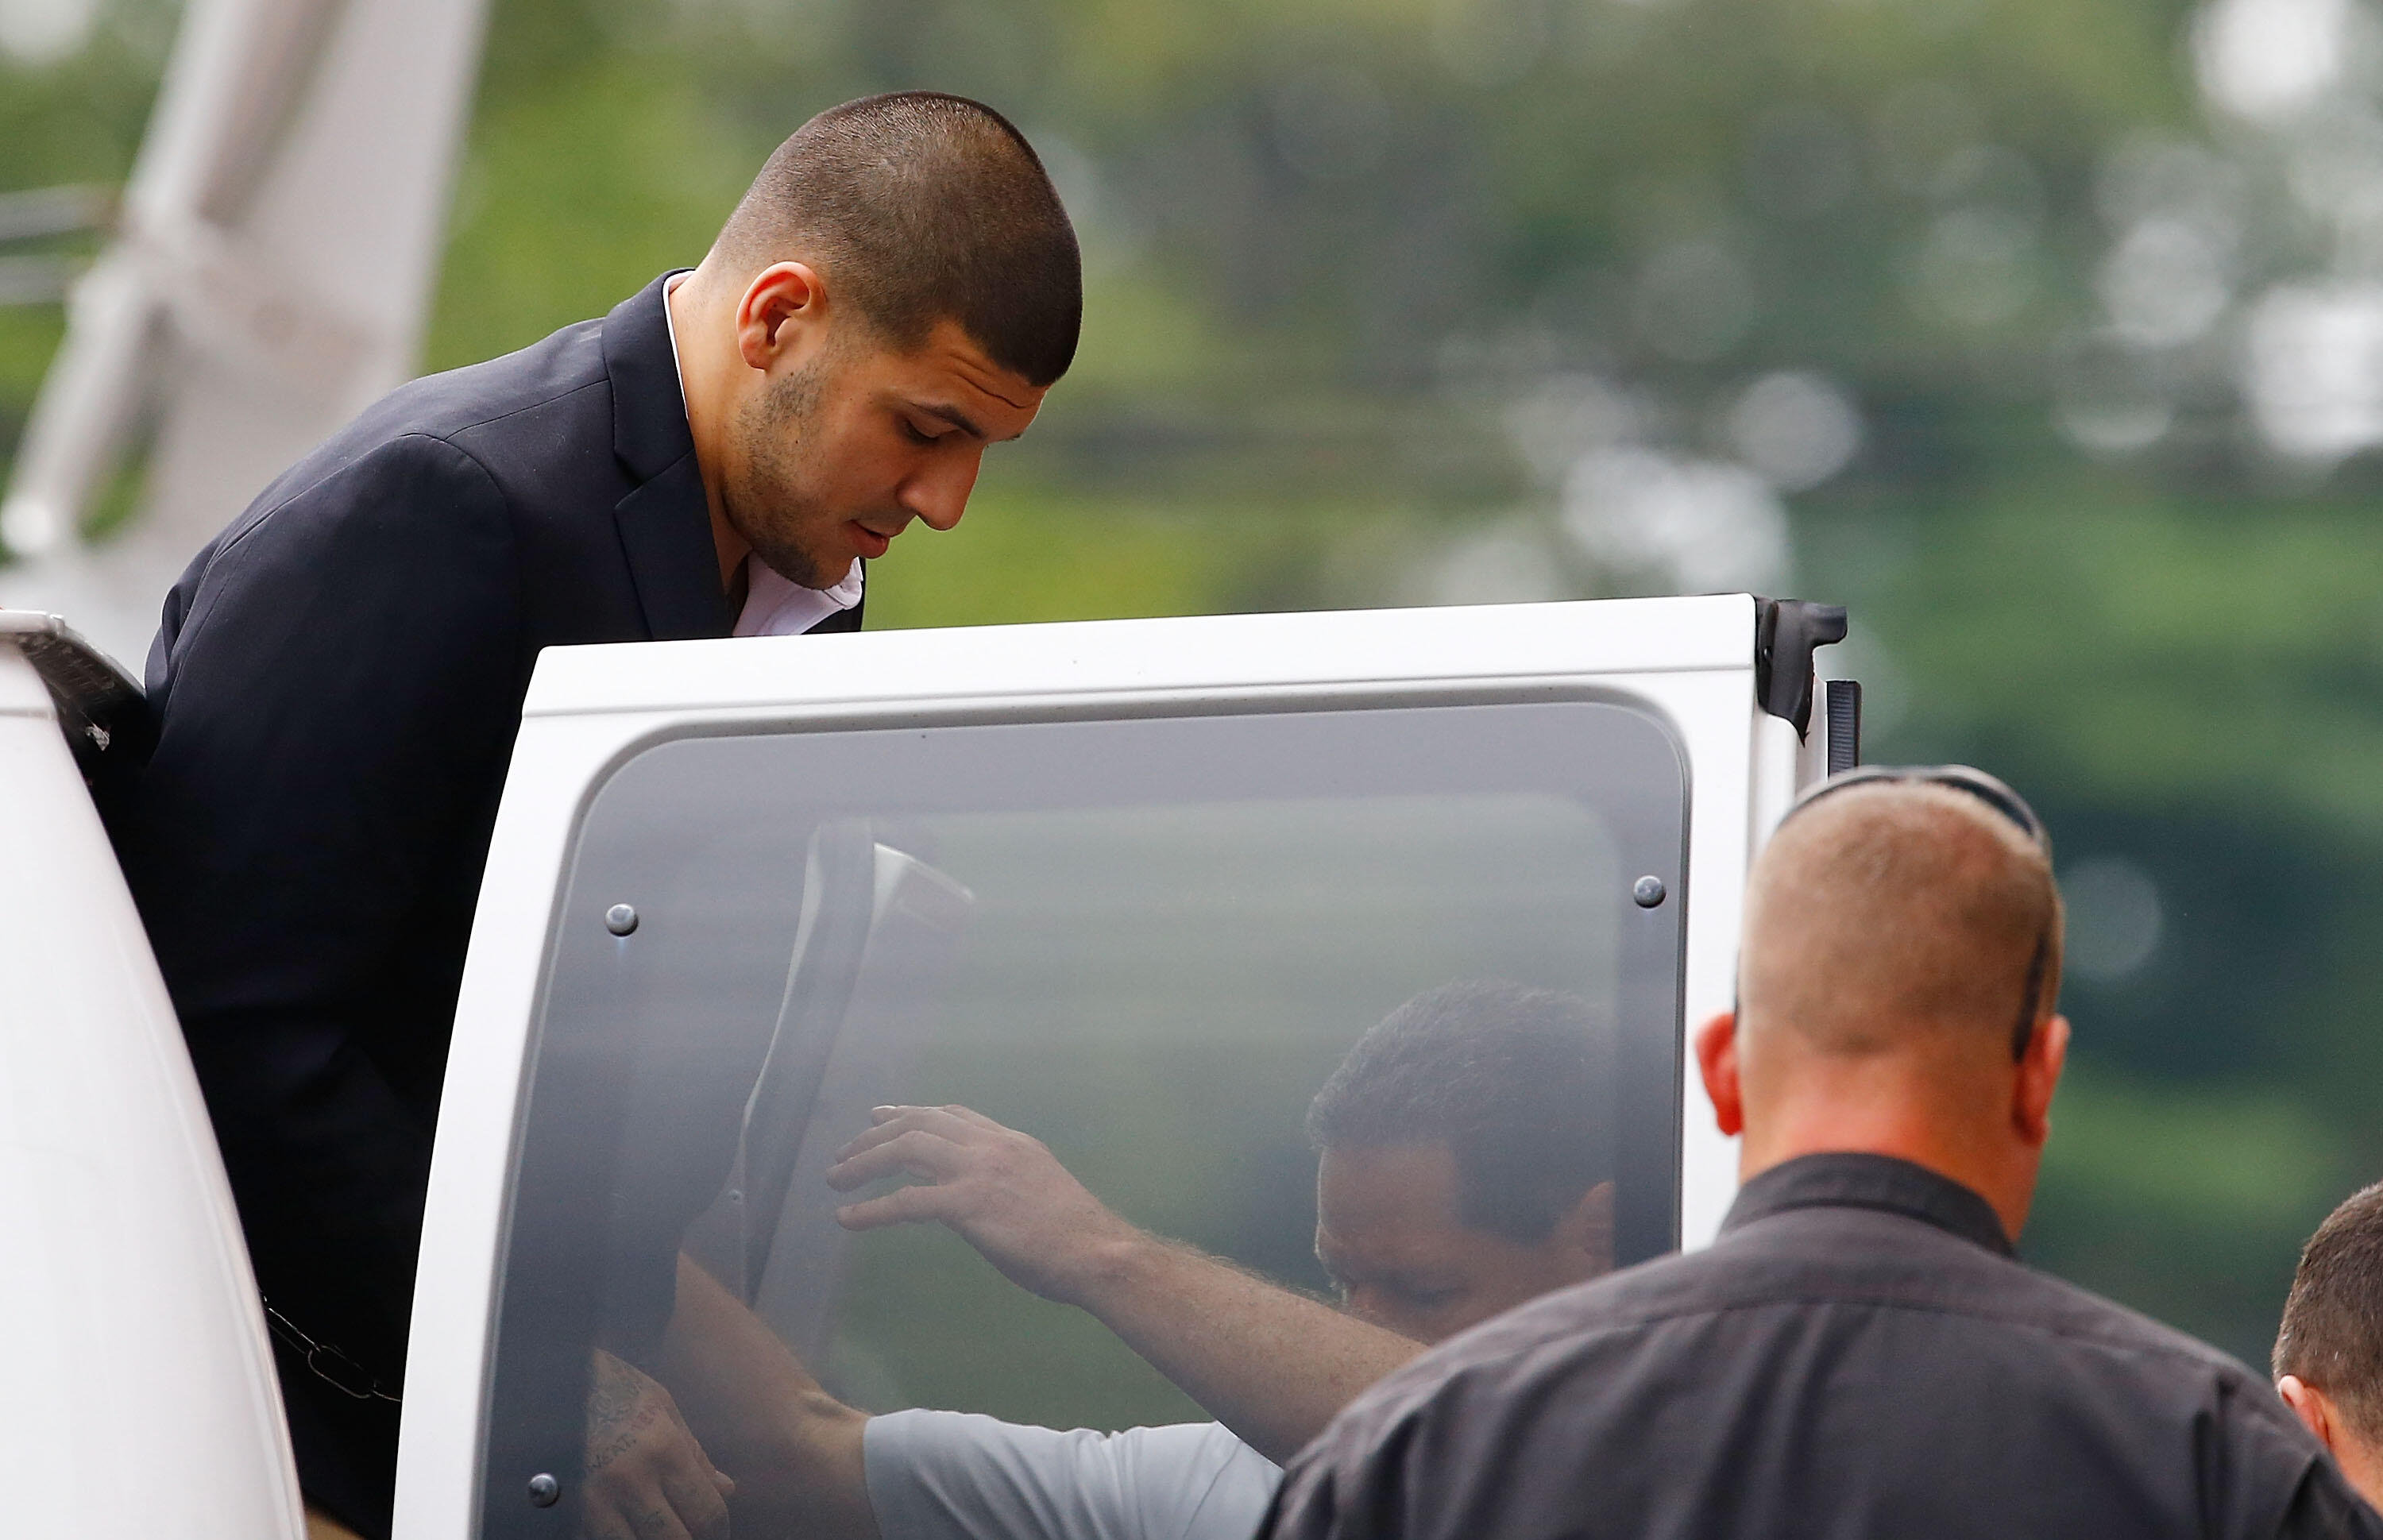 NORTH ATTLEBORO, MA - AUGUST 22: Aaron Hernandez is escorted into Attleboro District Court prior to his hearing on August 22, 2013 in North Attleboro, Massachusetts. Former New England Patriot Aaron Hernandez has been indicted on a first-degree murder cha